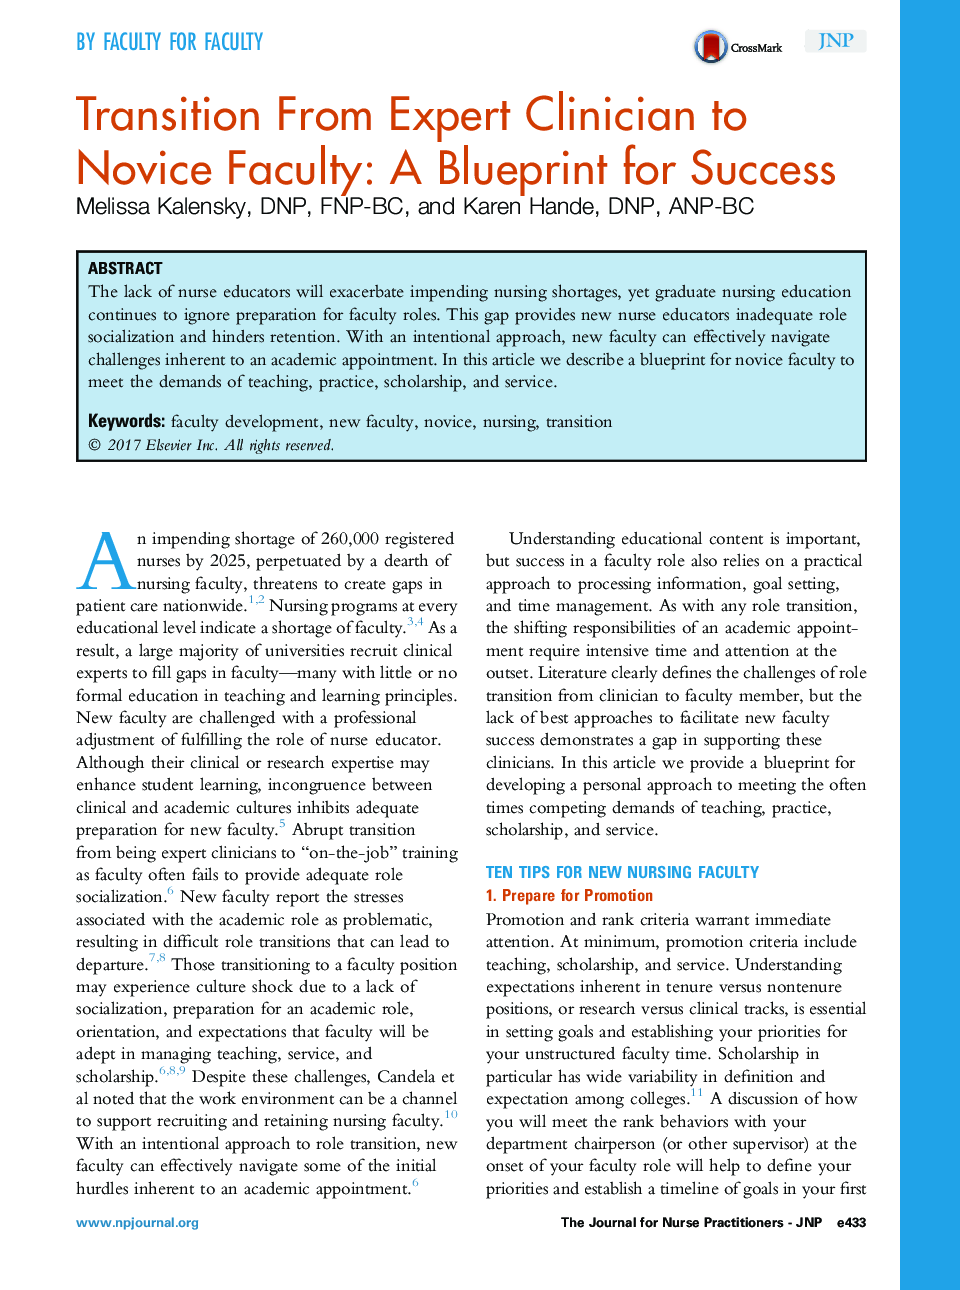 Transition From Expert Clinician to Novice Faculty: A Blueprint for Success